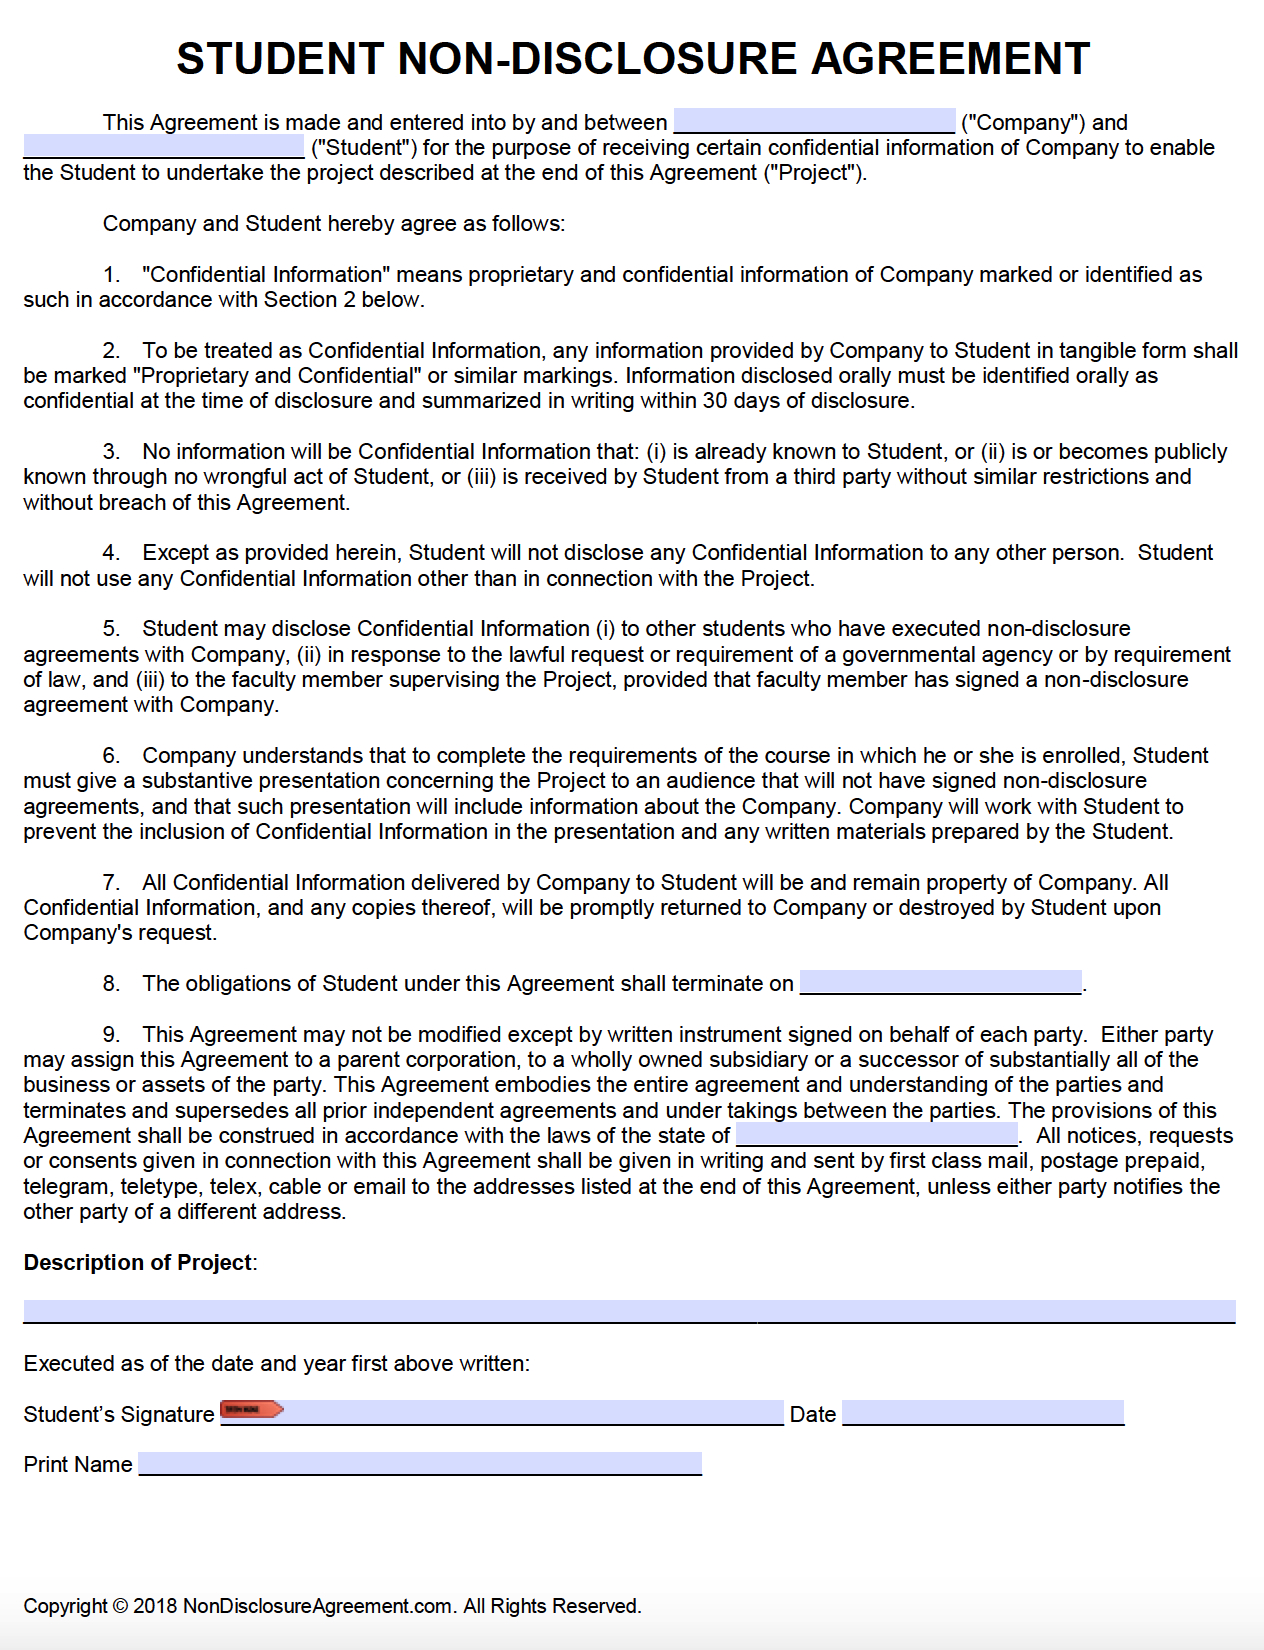 Workers Agreement Sample Free Student Non Disclosure Agreement Nda Pdf Word Docx